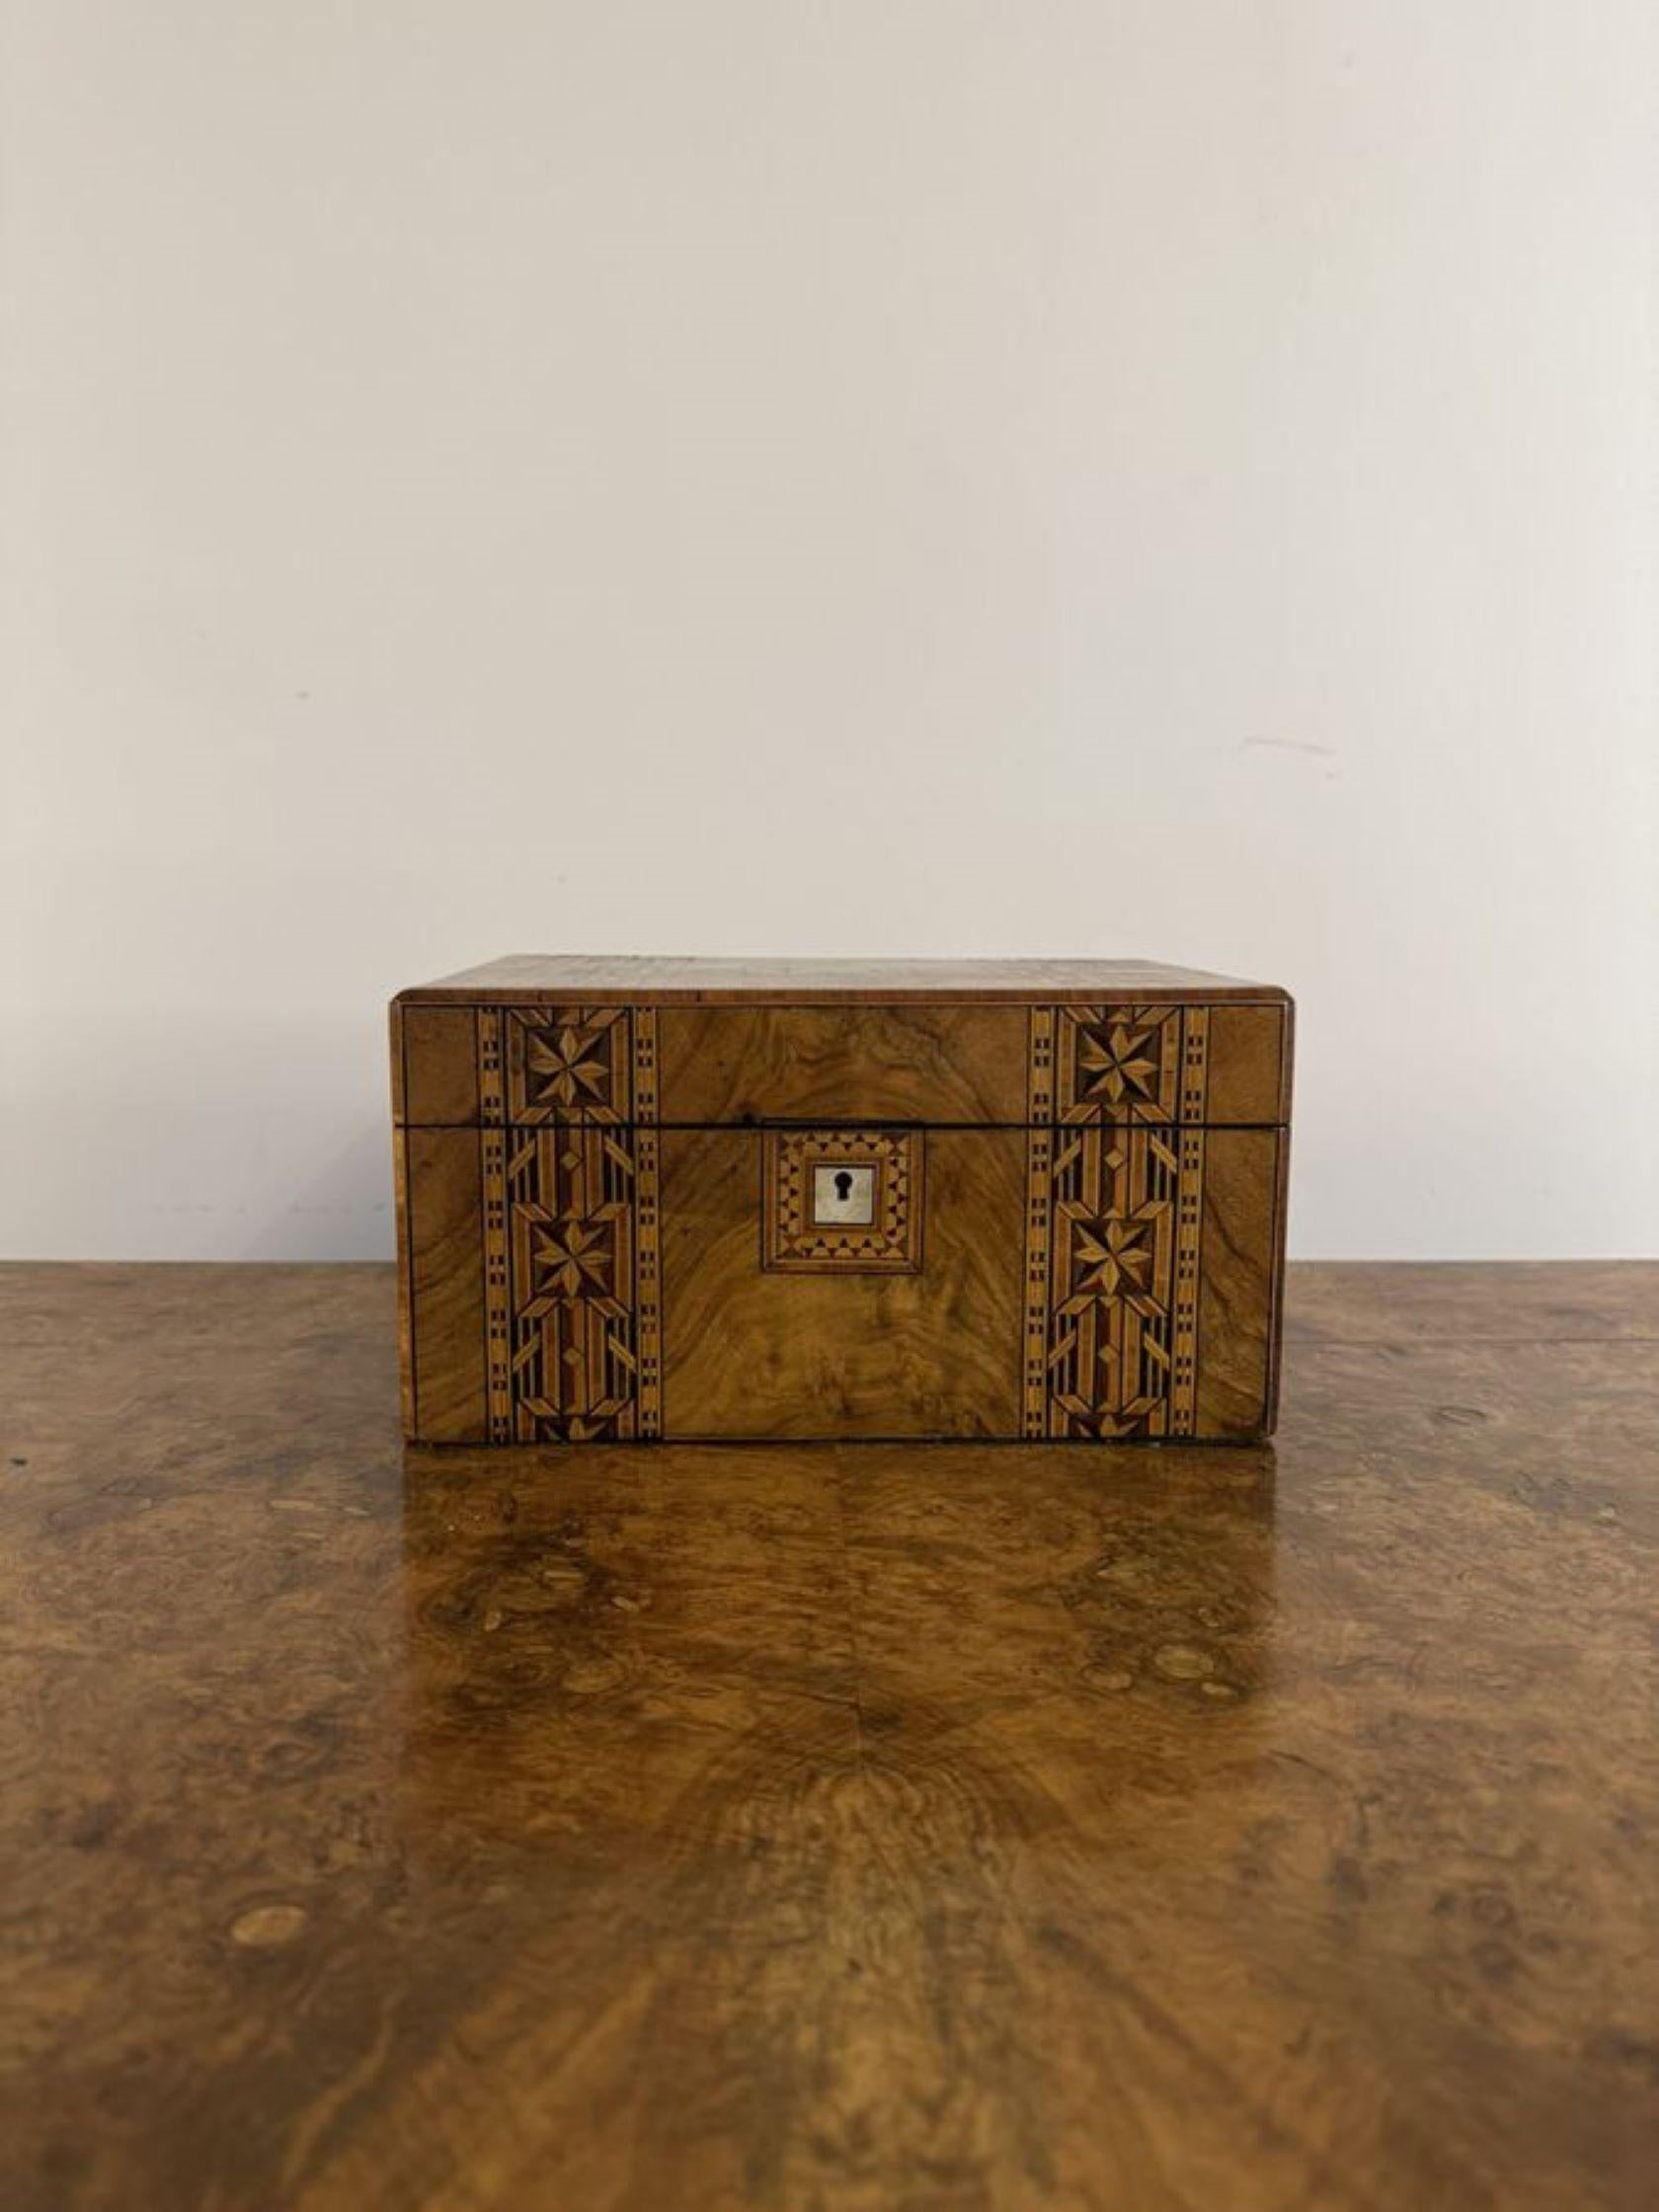 Quality antique Victorian walnut tunbridge ware inlaid sewing box, having beautiful inlaid detail to the box with a lift up lid opening to reveal an interior tray above a storage compartment. 

D. 1880